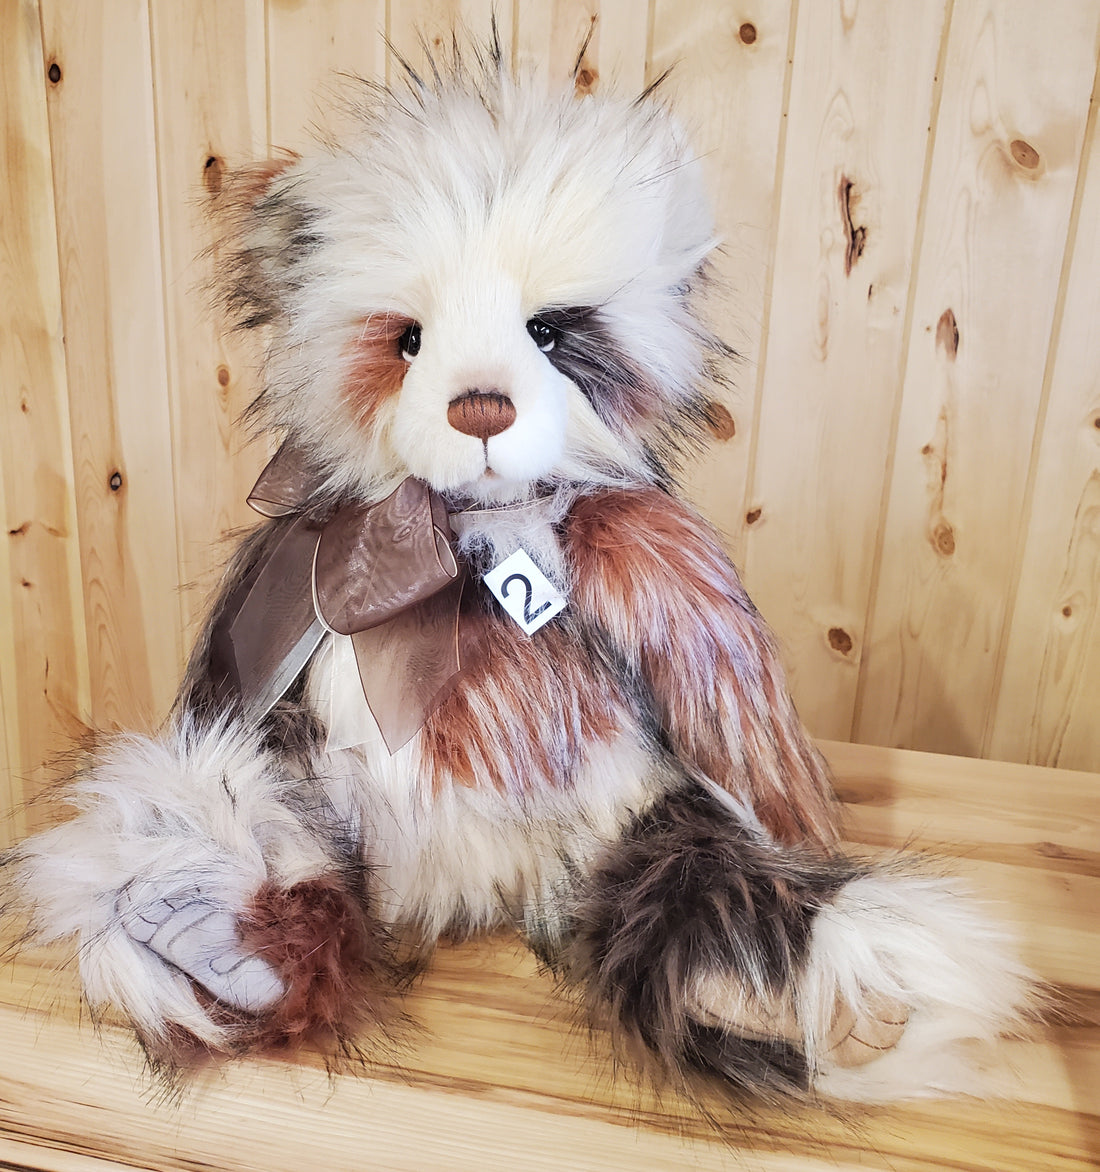 Big Brother - 23" Long Haired Plush from Charlie Bears